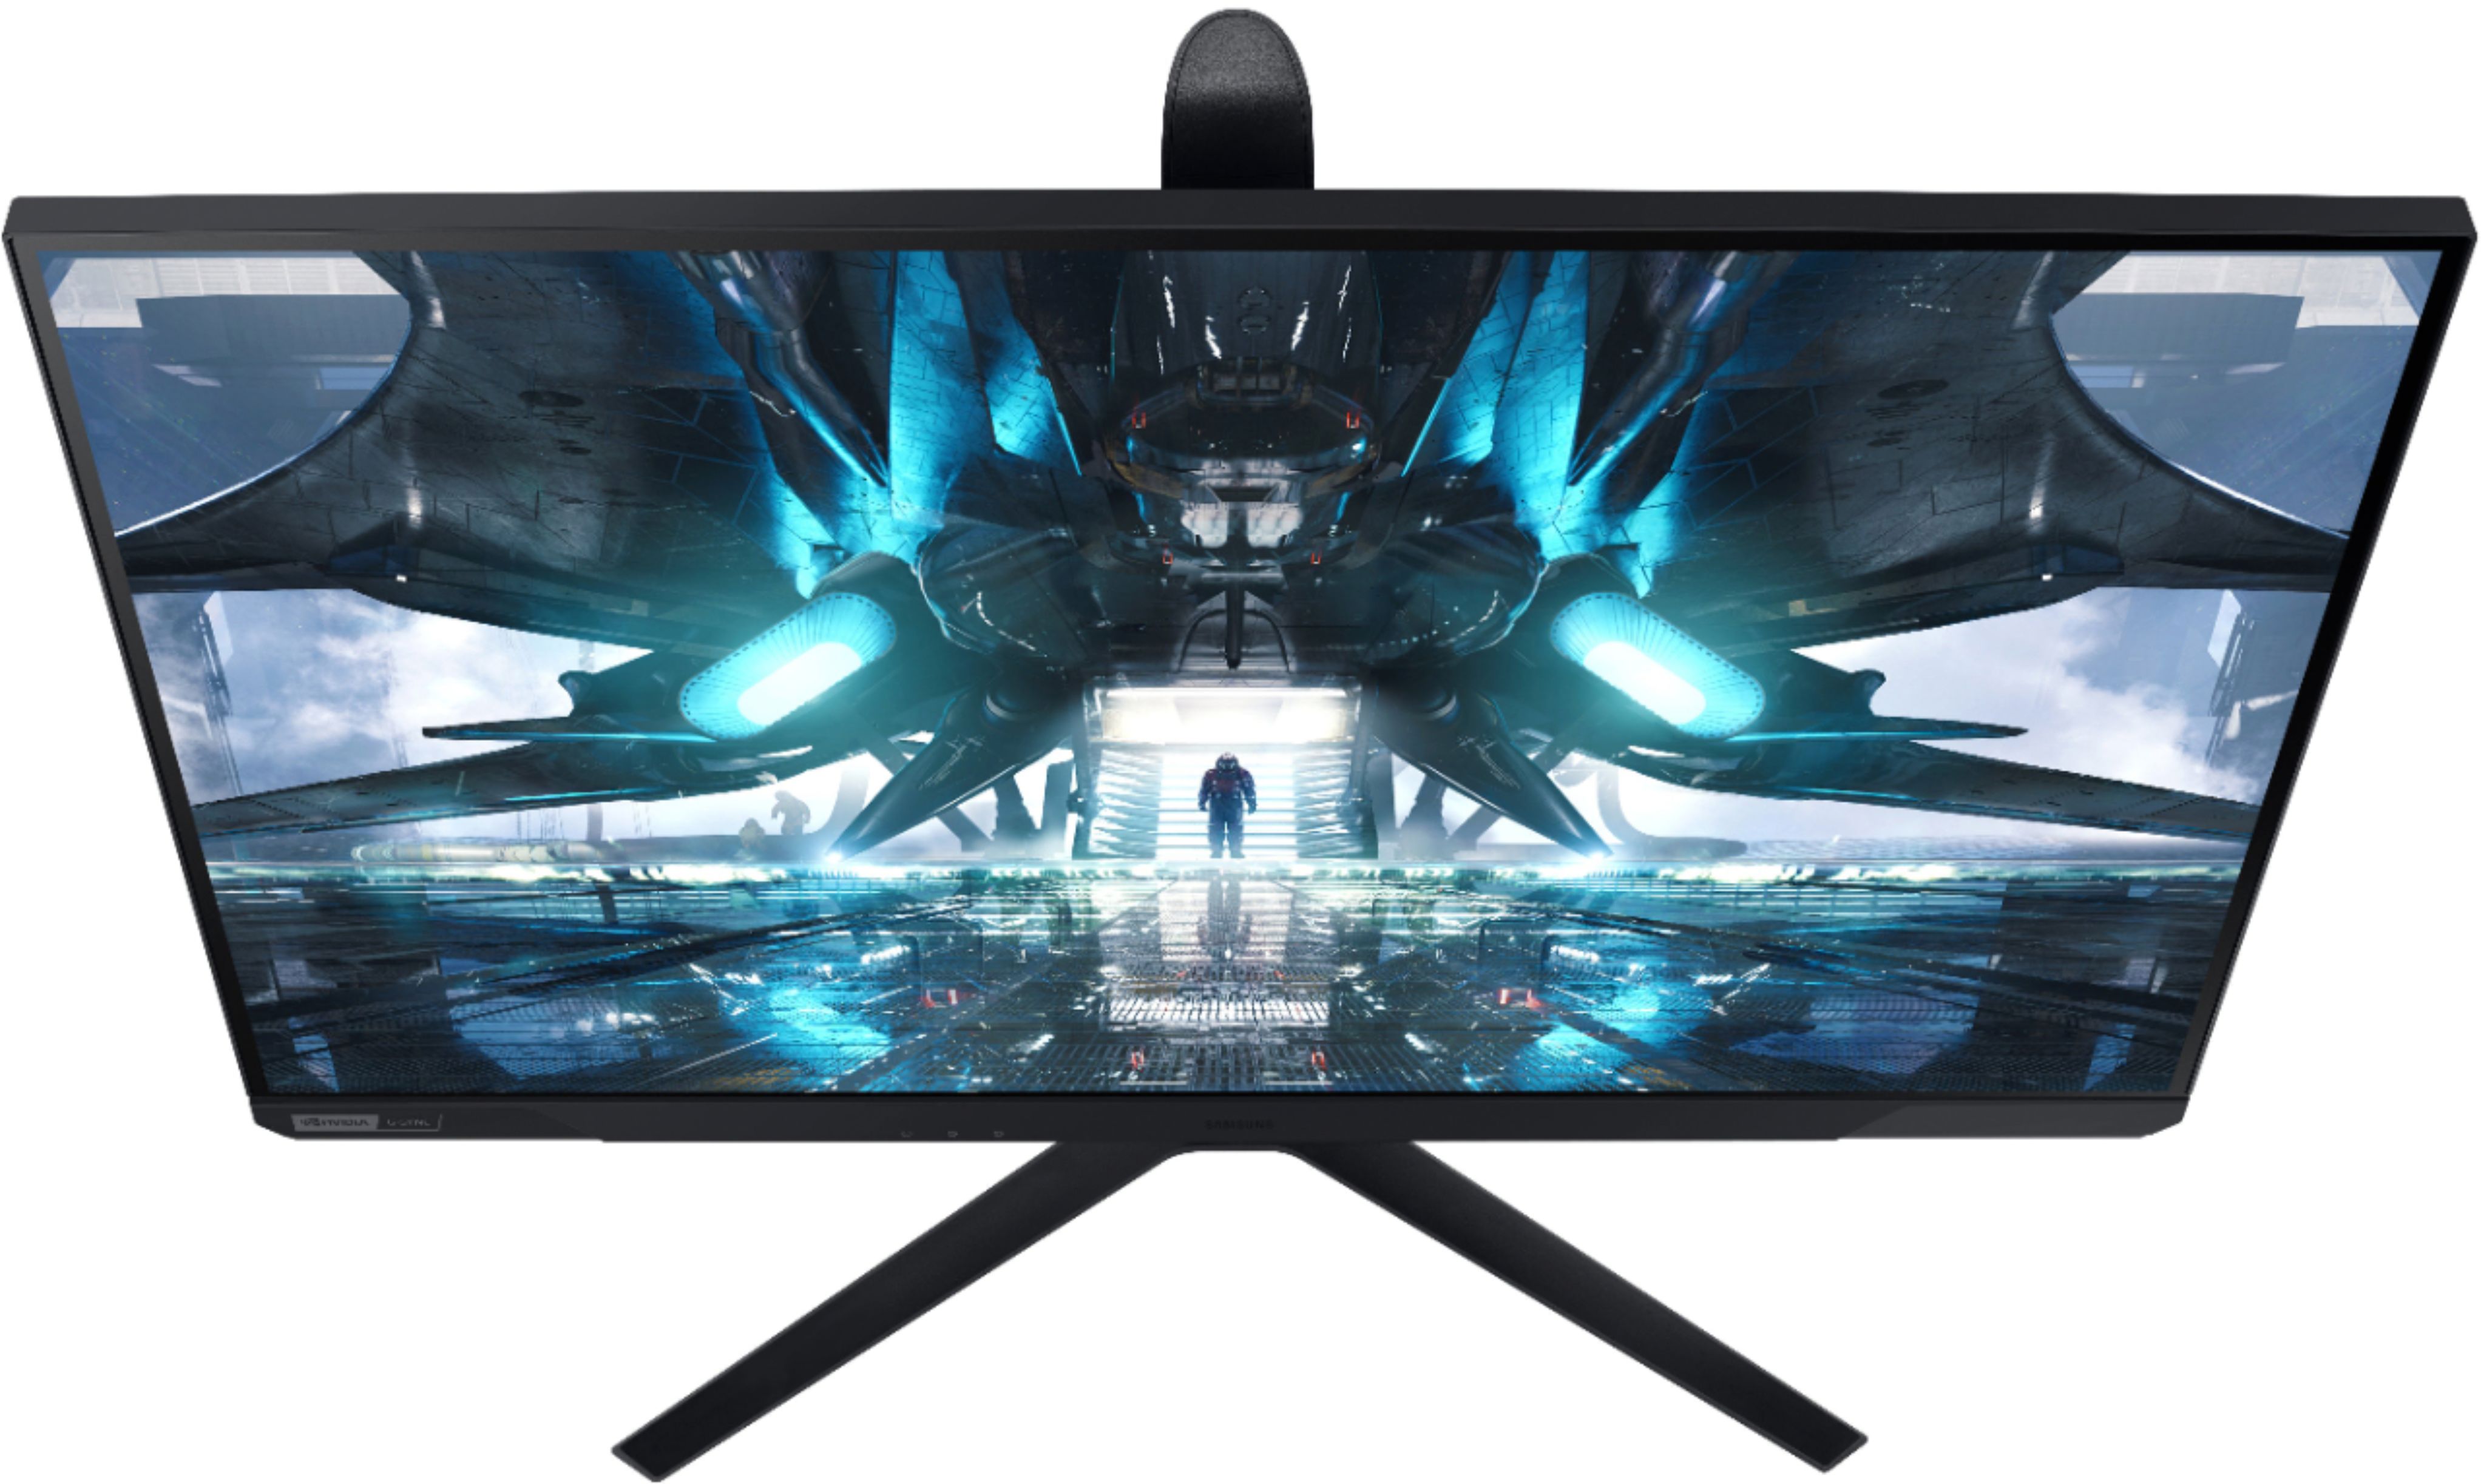 Samsung Odyssey G6, Odyssey G7 are first gaming monitors to run Tizen OS -  SamMobile